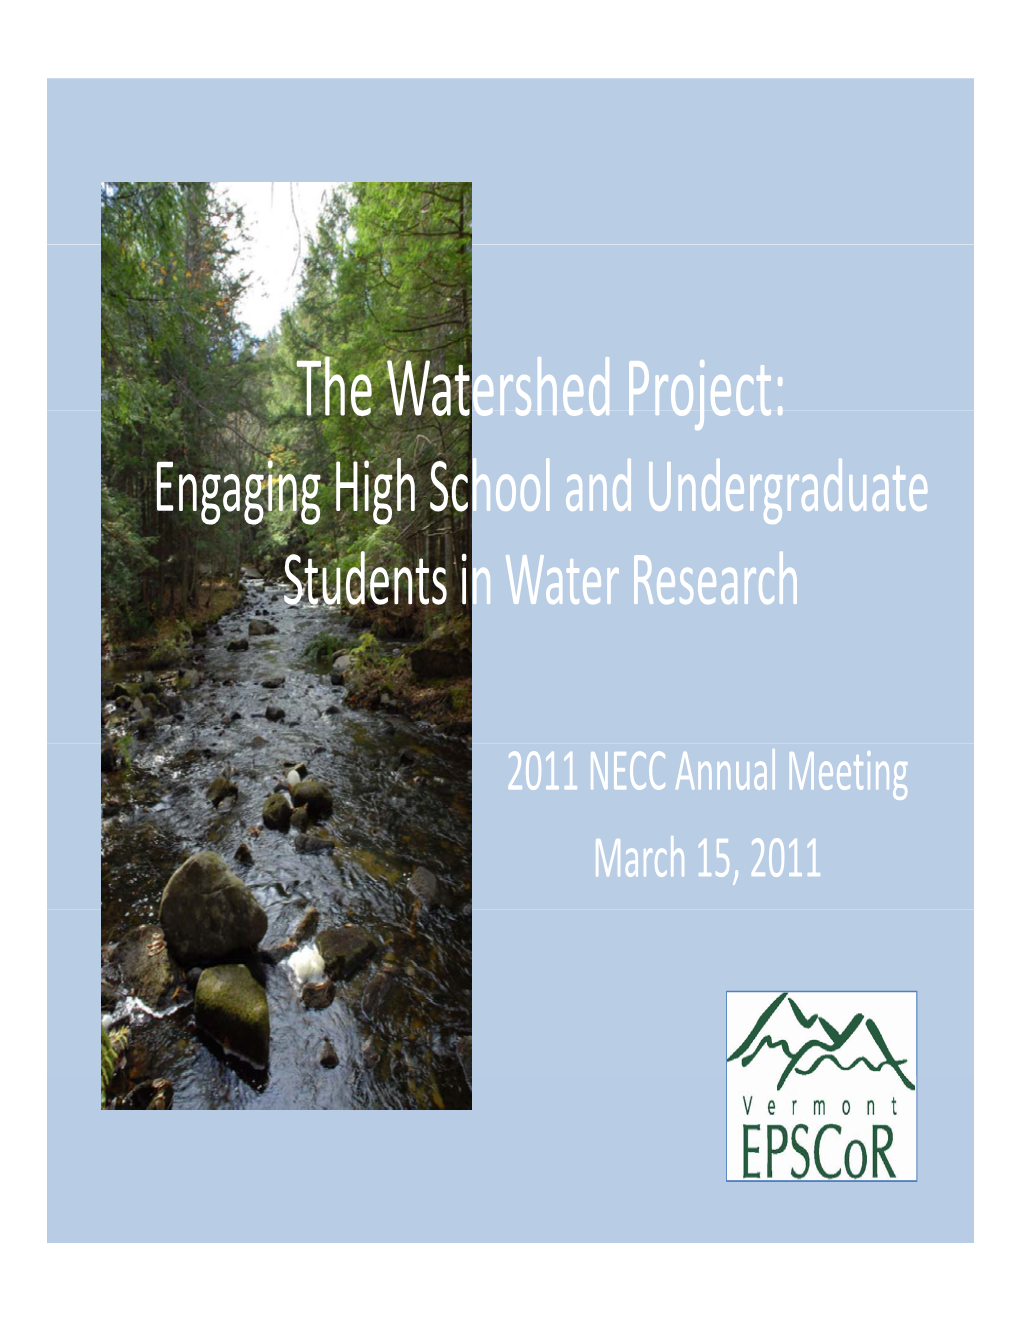 The Watershed Project: Engaging High School and Undergraduate Students in Water Research